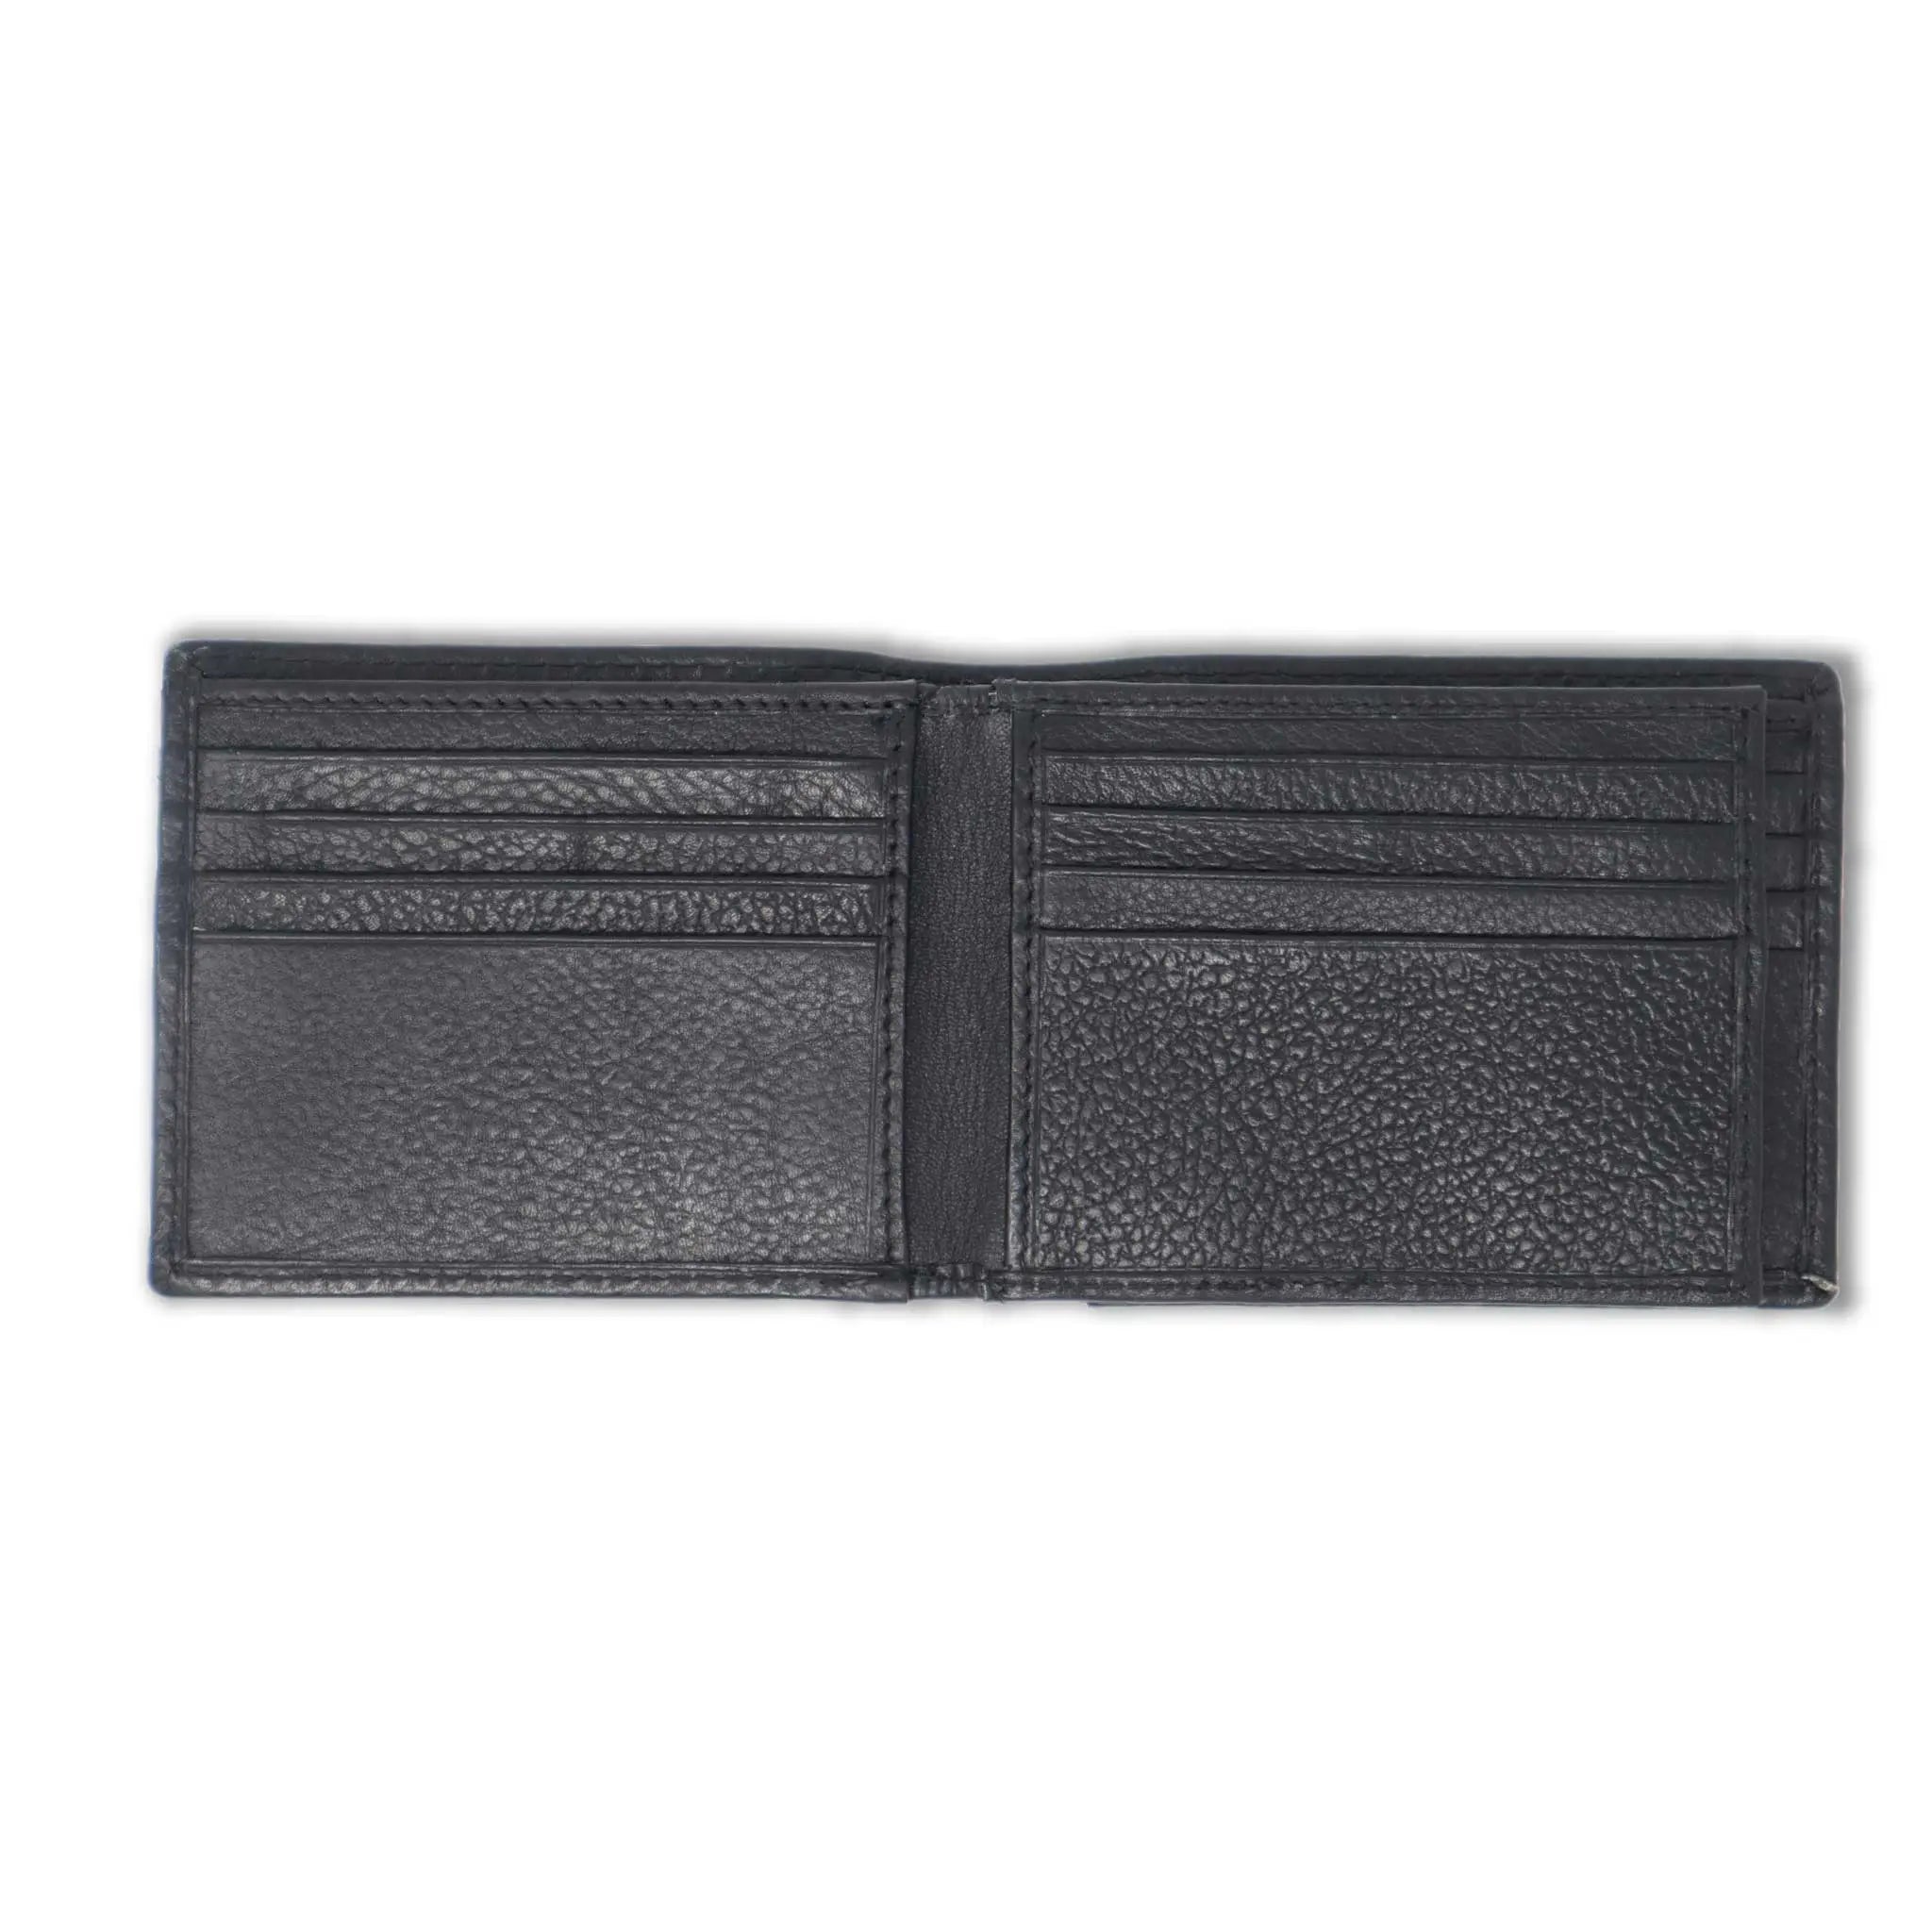 100% Genuine and Premium Men's Leather Wallets